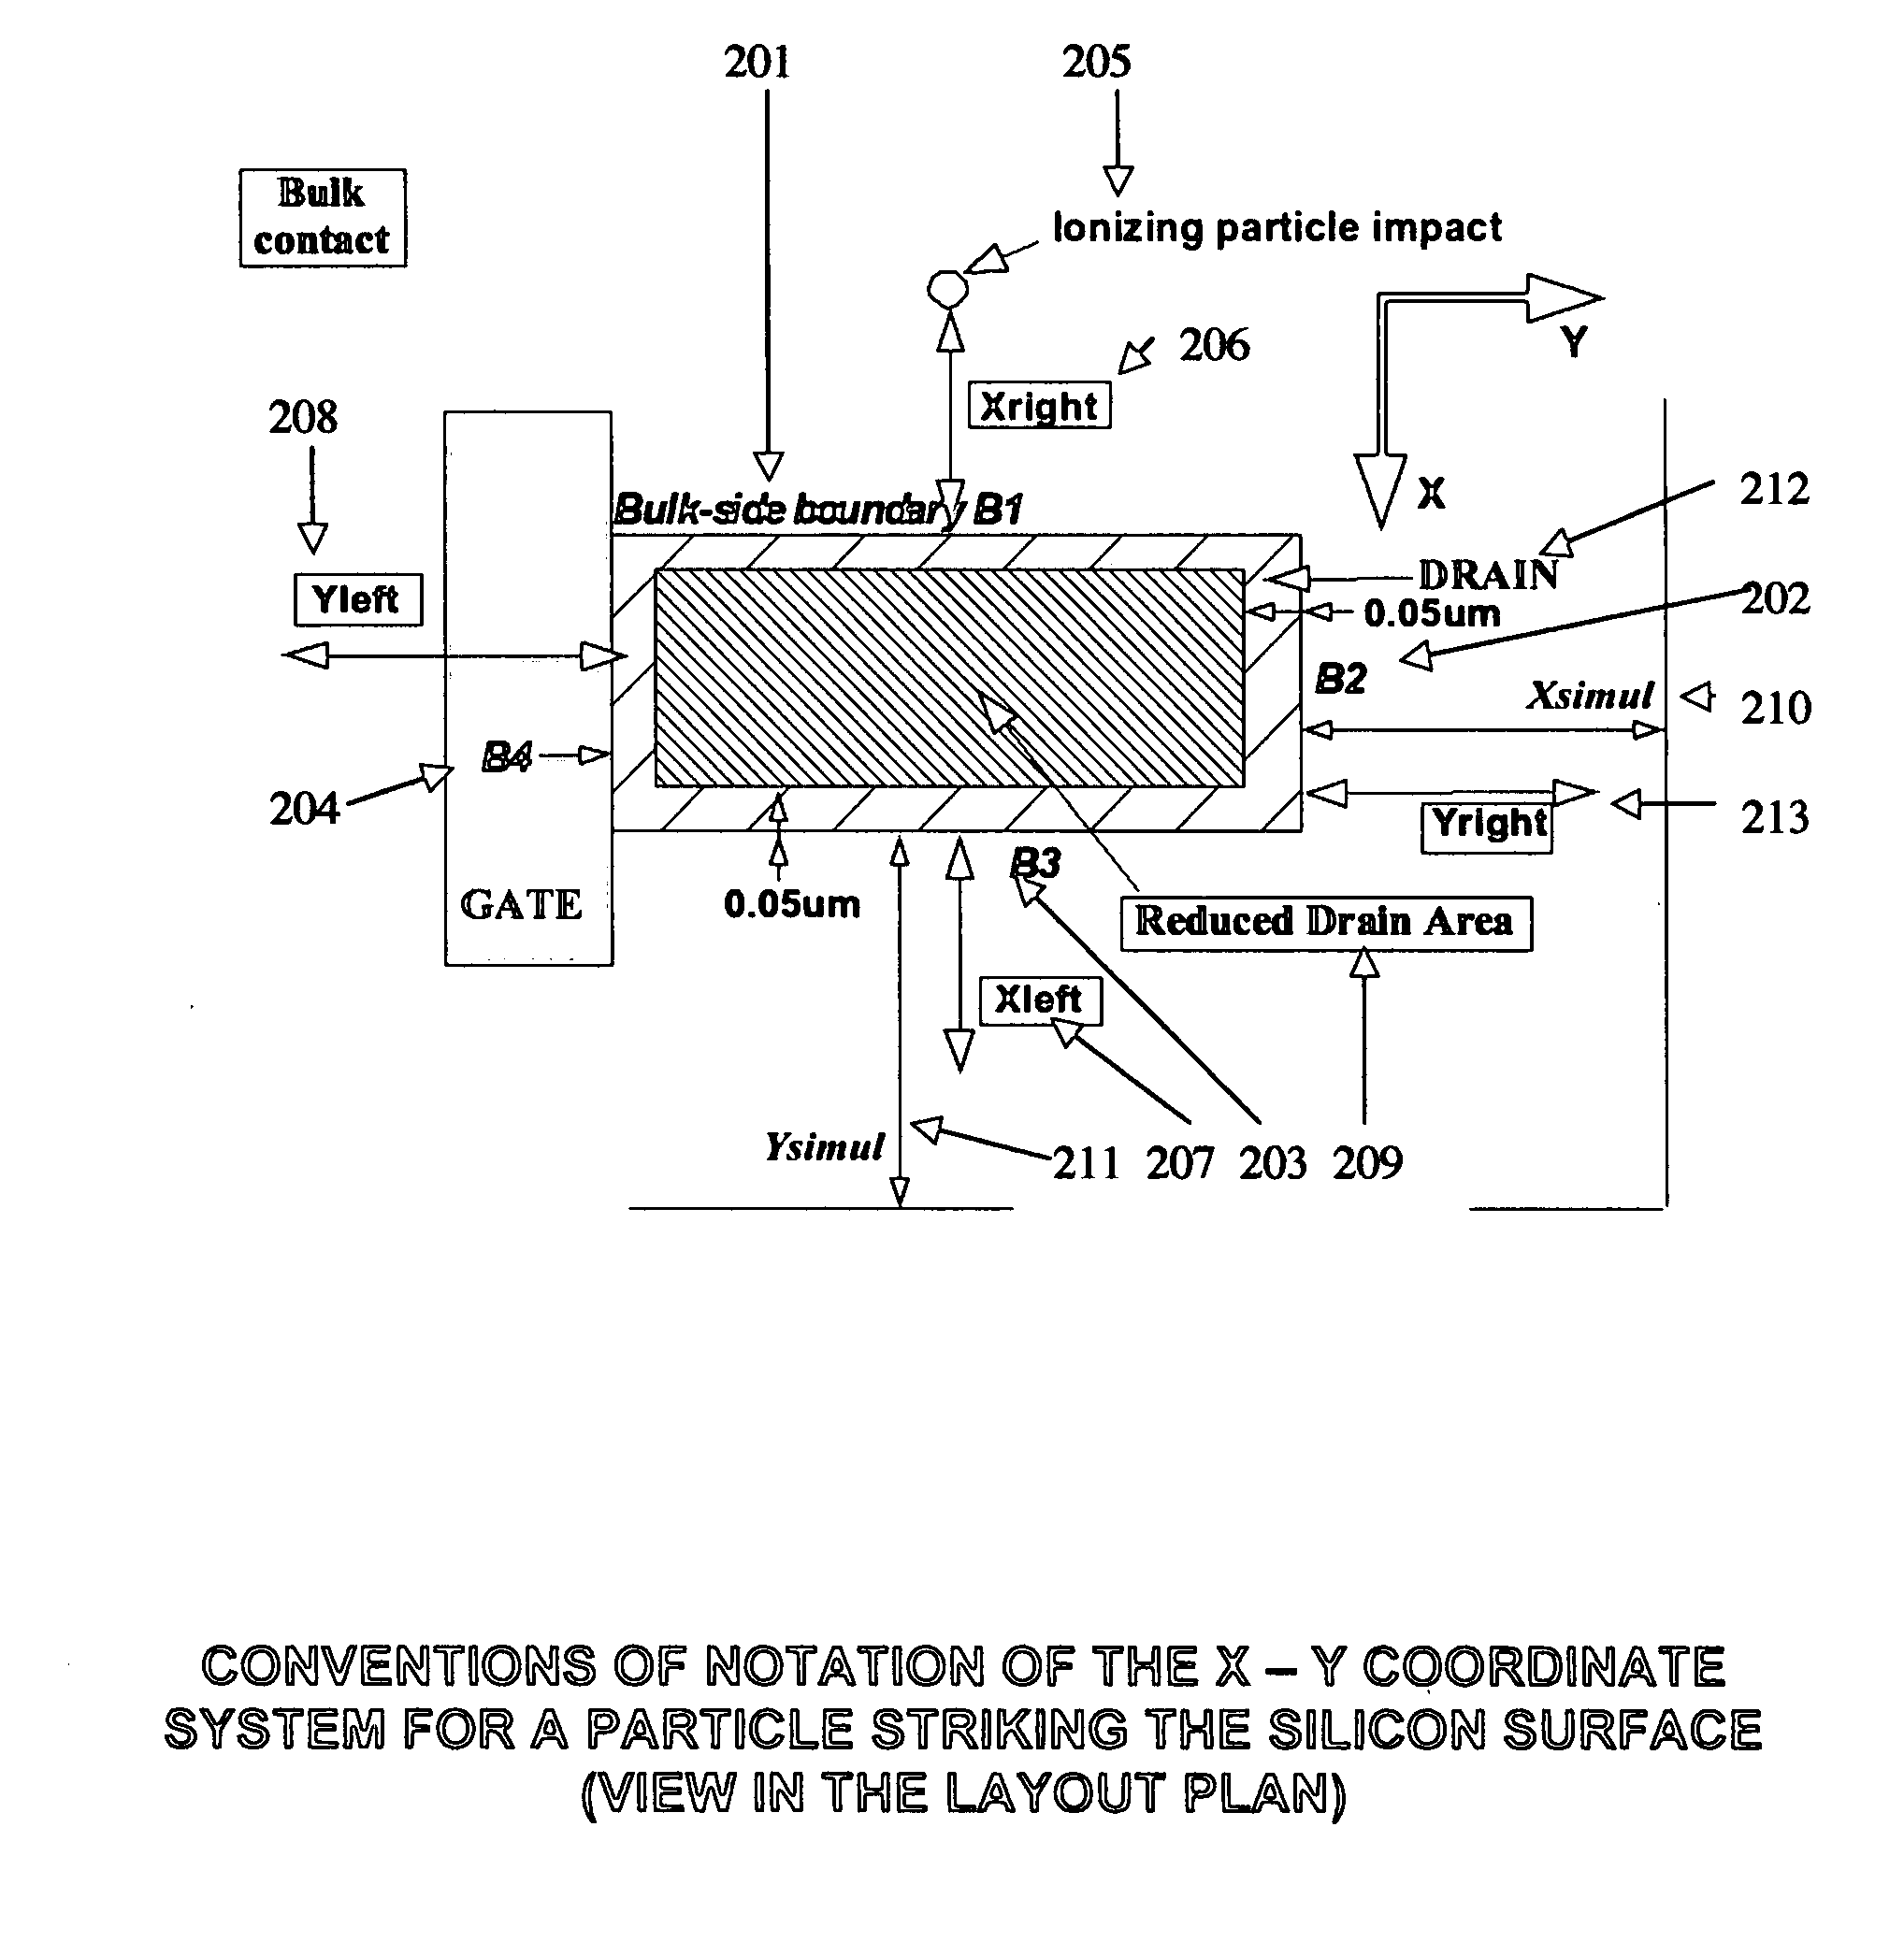 Apparatus and method for the determination of SEU and SET disruptions in a circuit caused by ionizing particle strikes